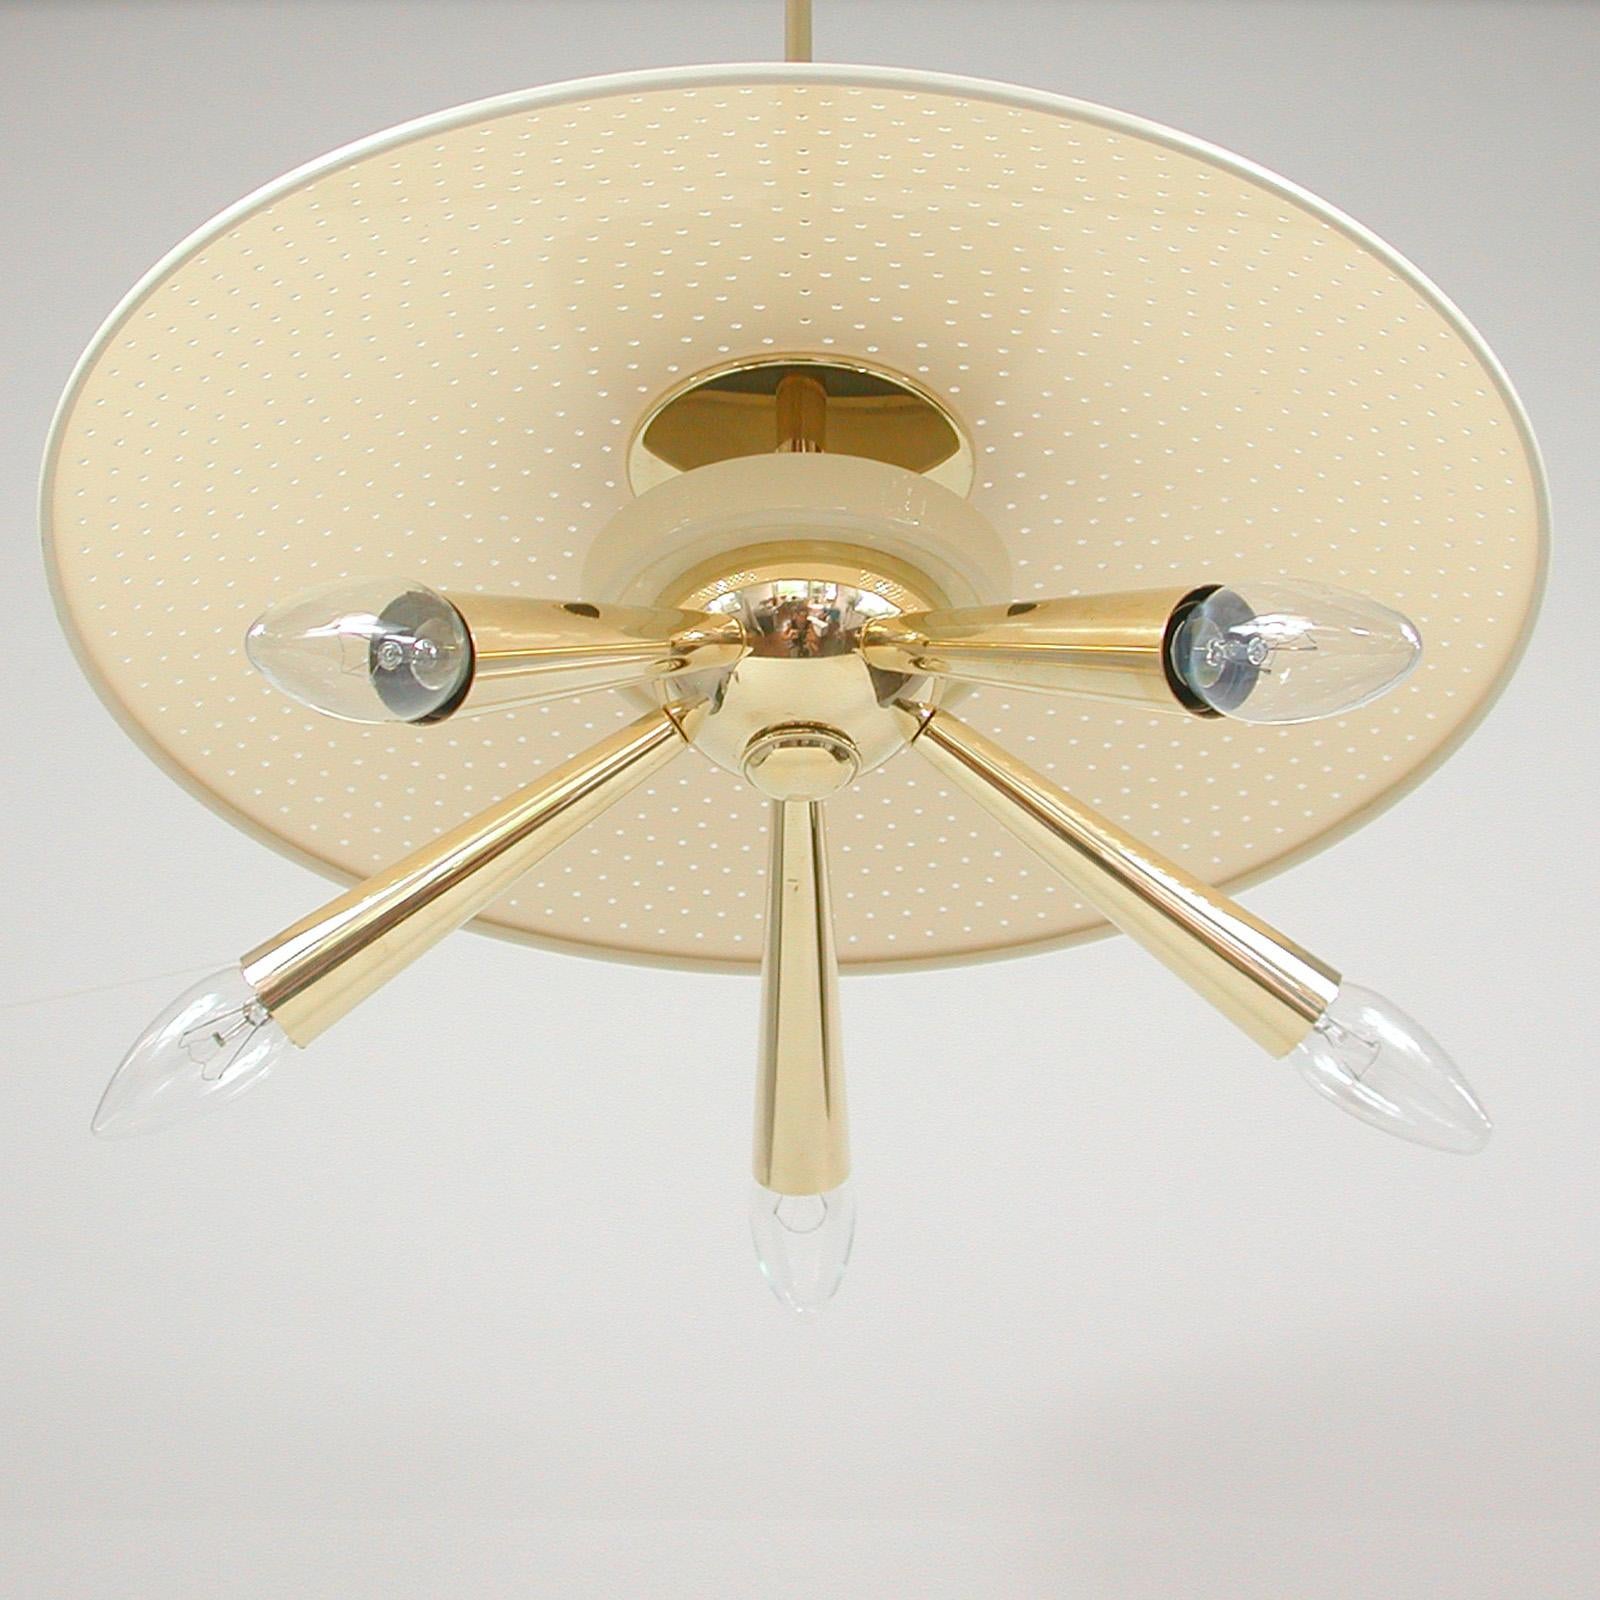 Midcentury Brass Dome 5 Light Pendant, Italy Early 1950s For Sale 4